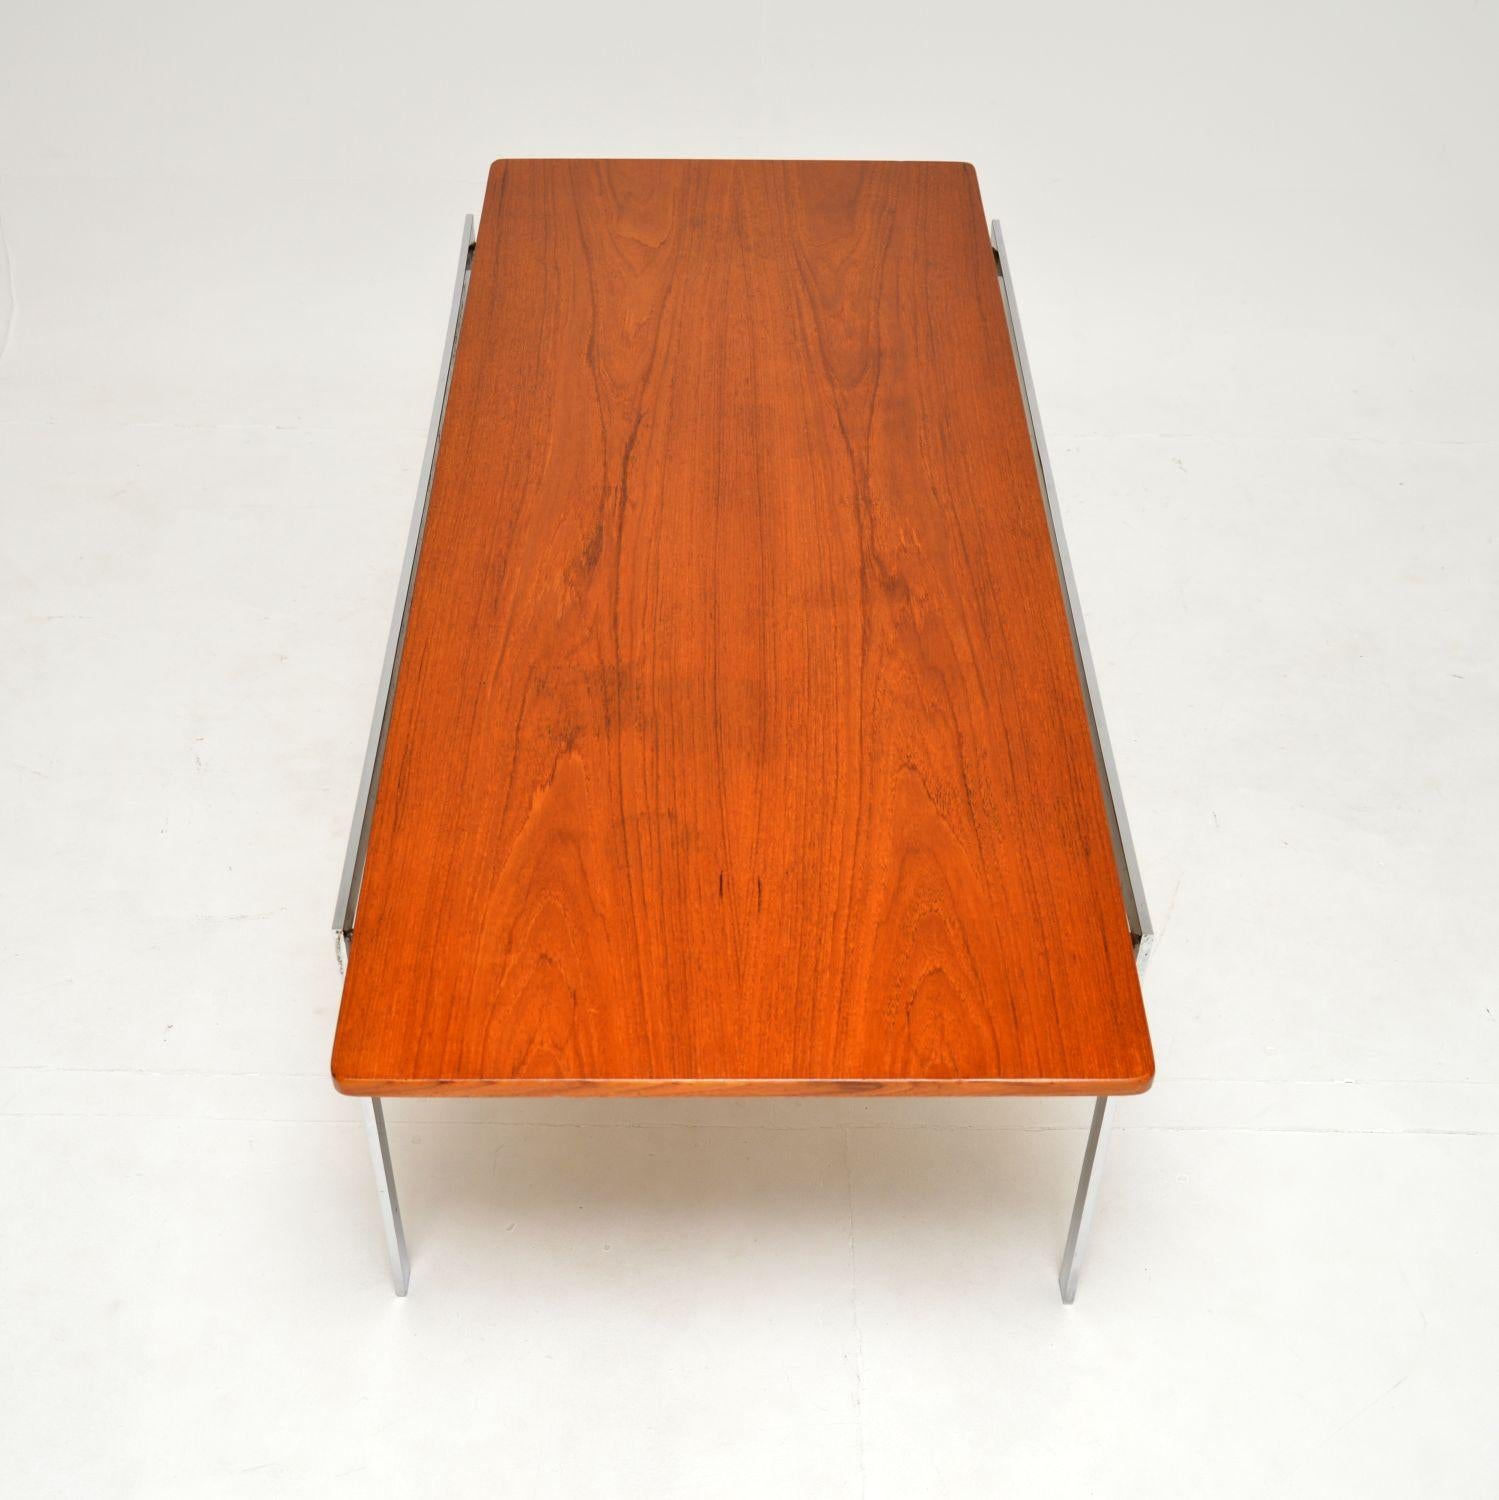 Danish Vintage Teak and Chrome Coffee Table by Arne Jacobsen In Good Condition For Sale In London, GB